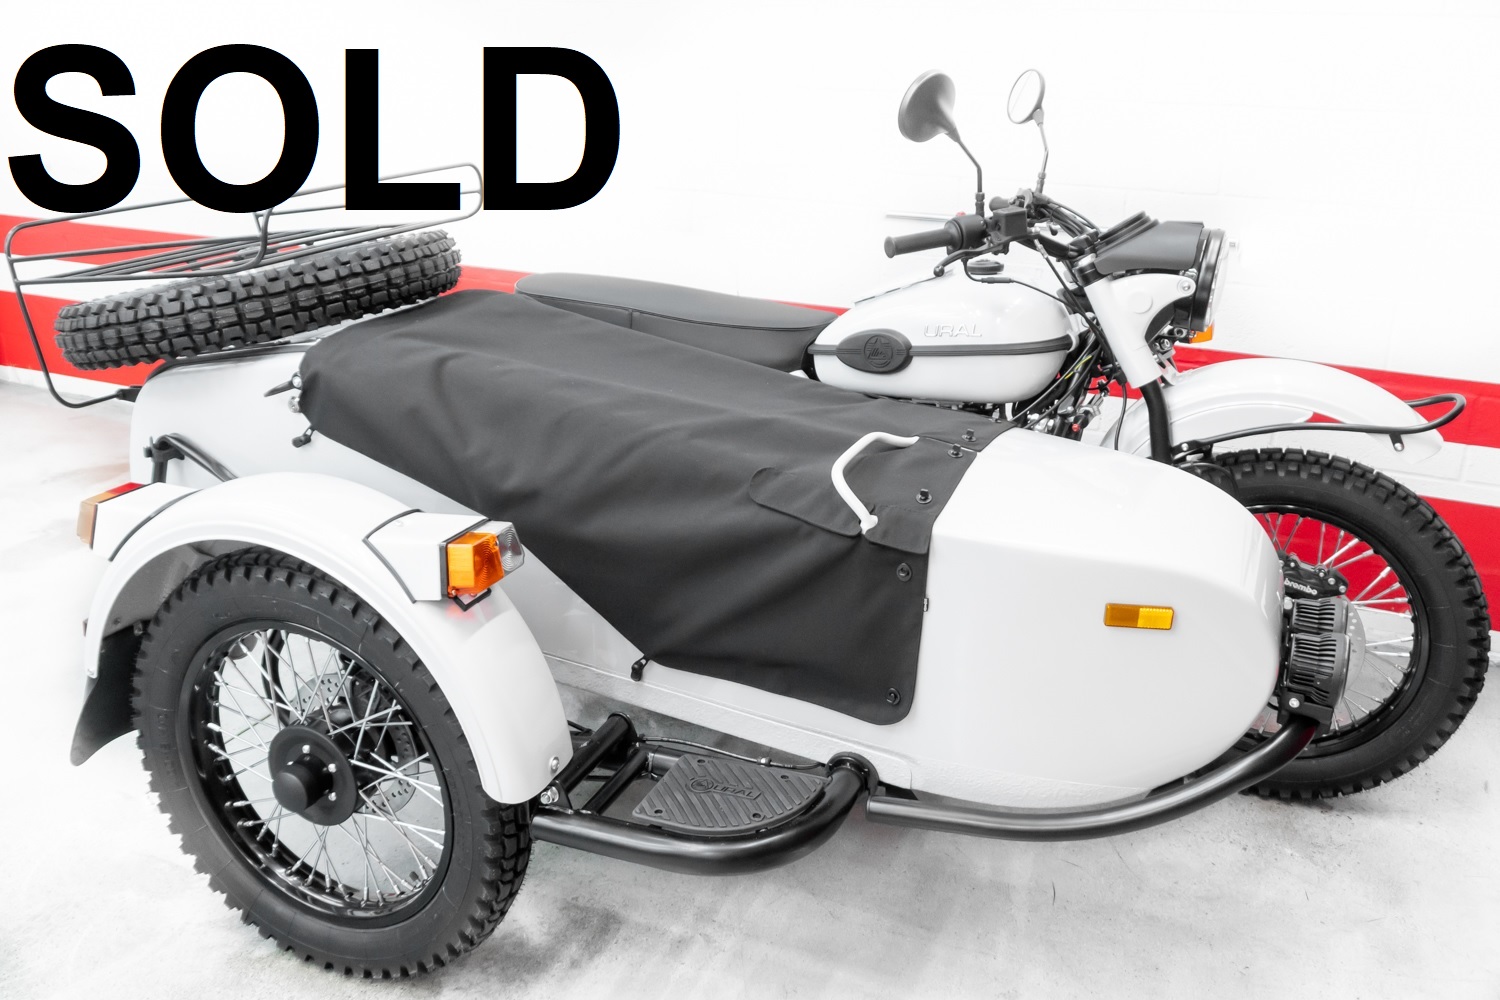 2021 Ural Gear Up (2WD) - NEW 2021 MODEL